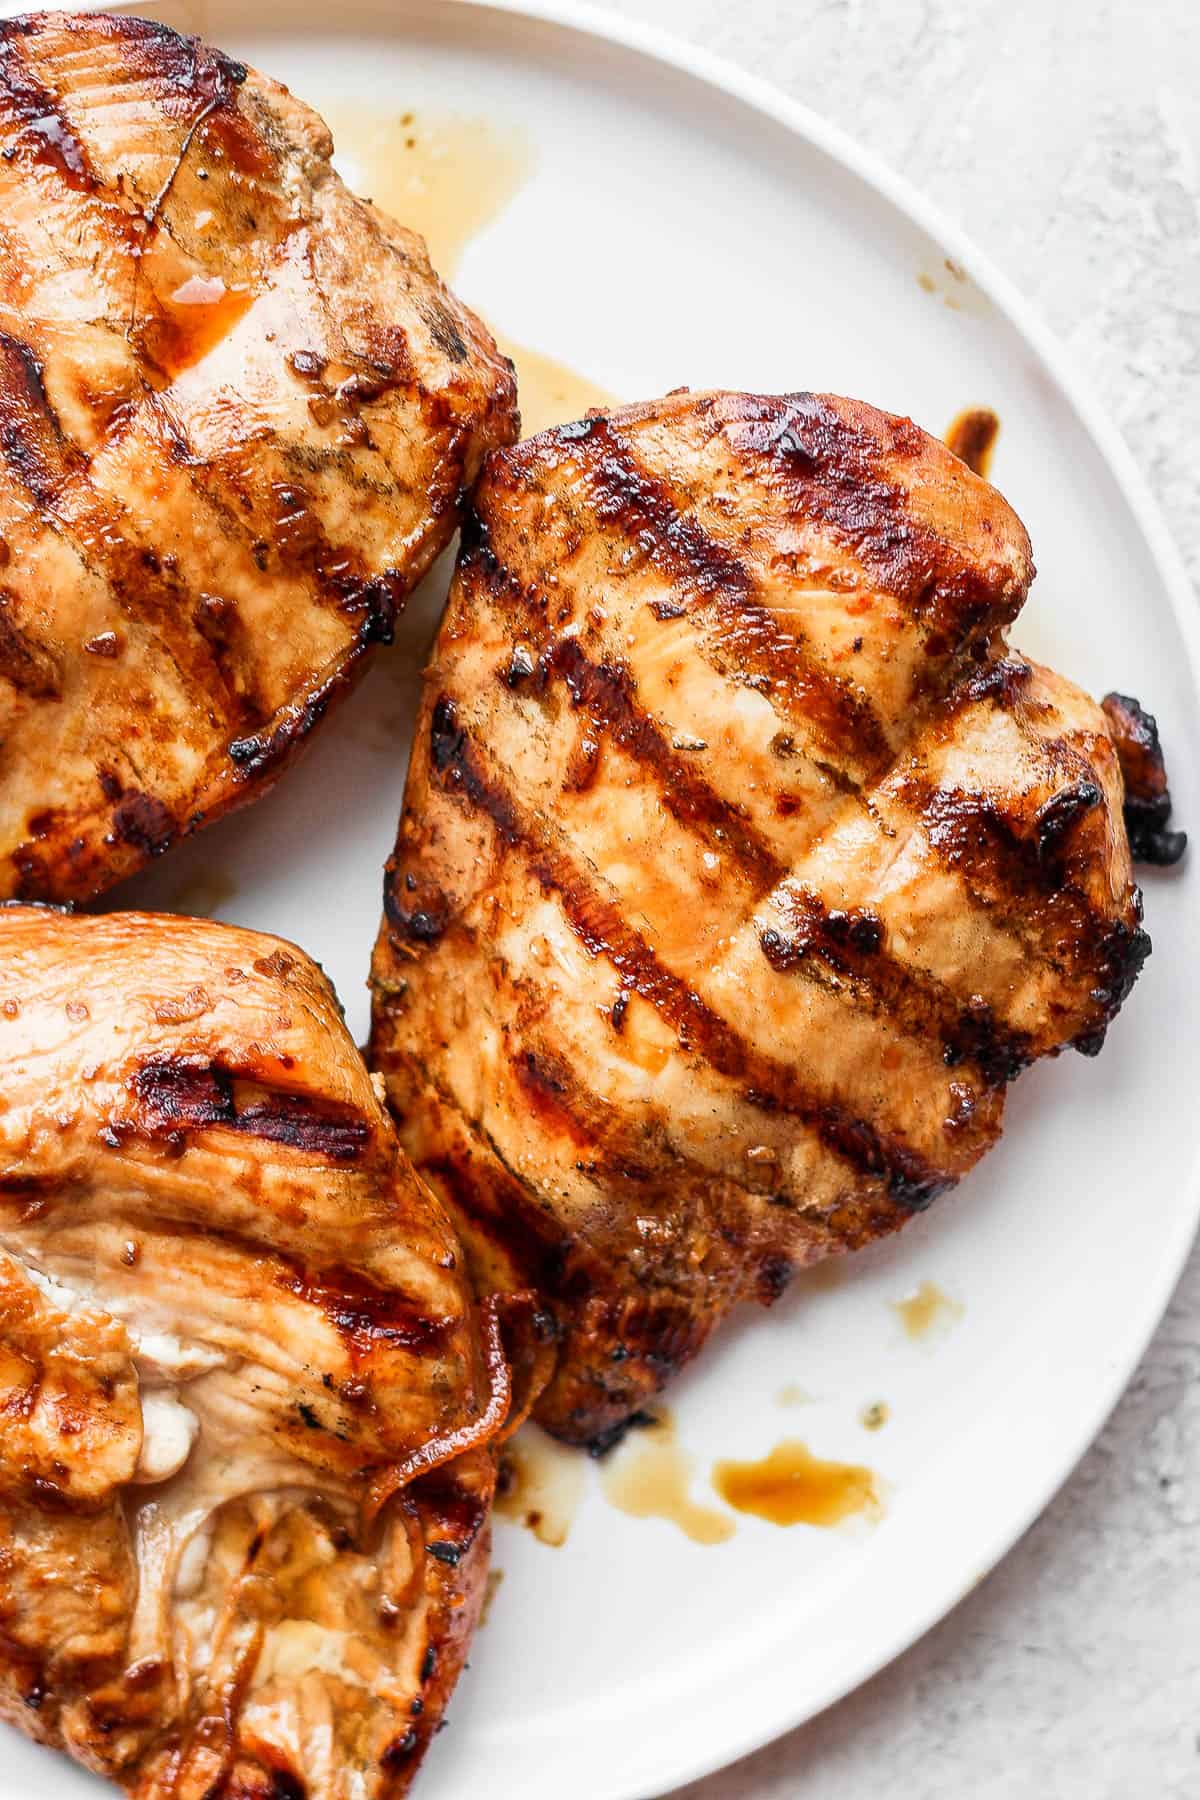 Grilled chicken breasts on a plate.